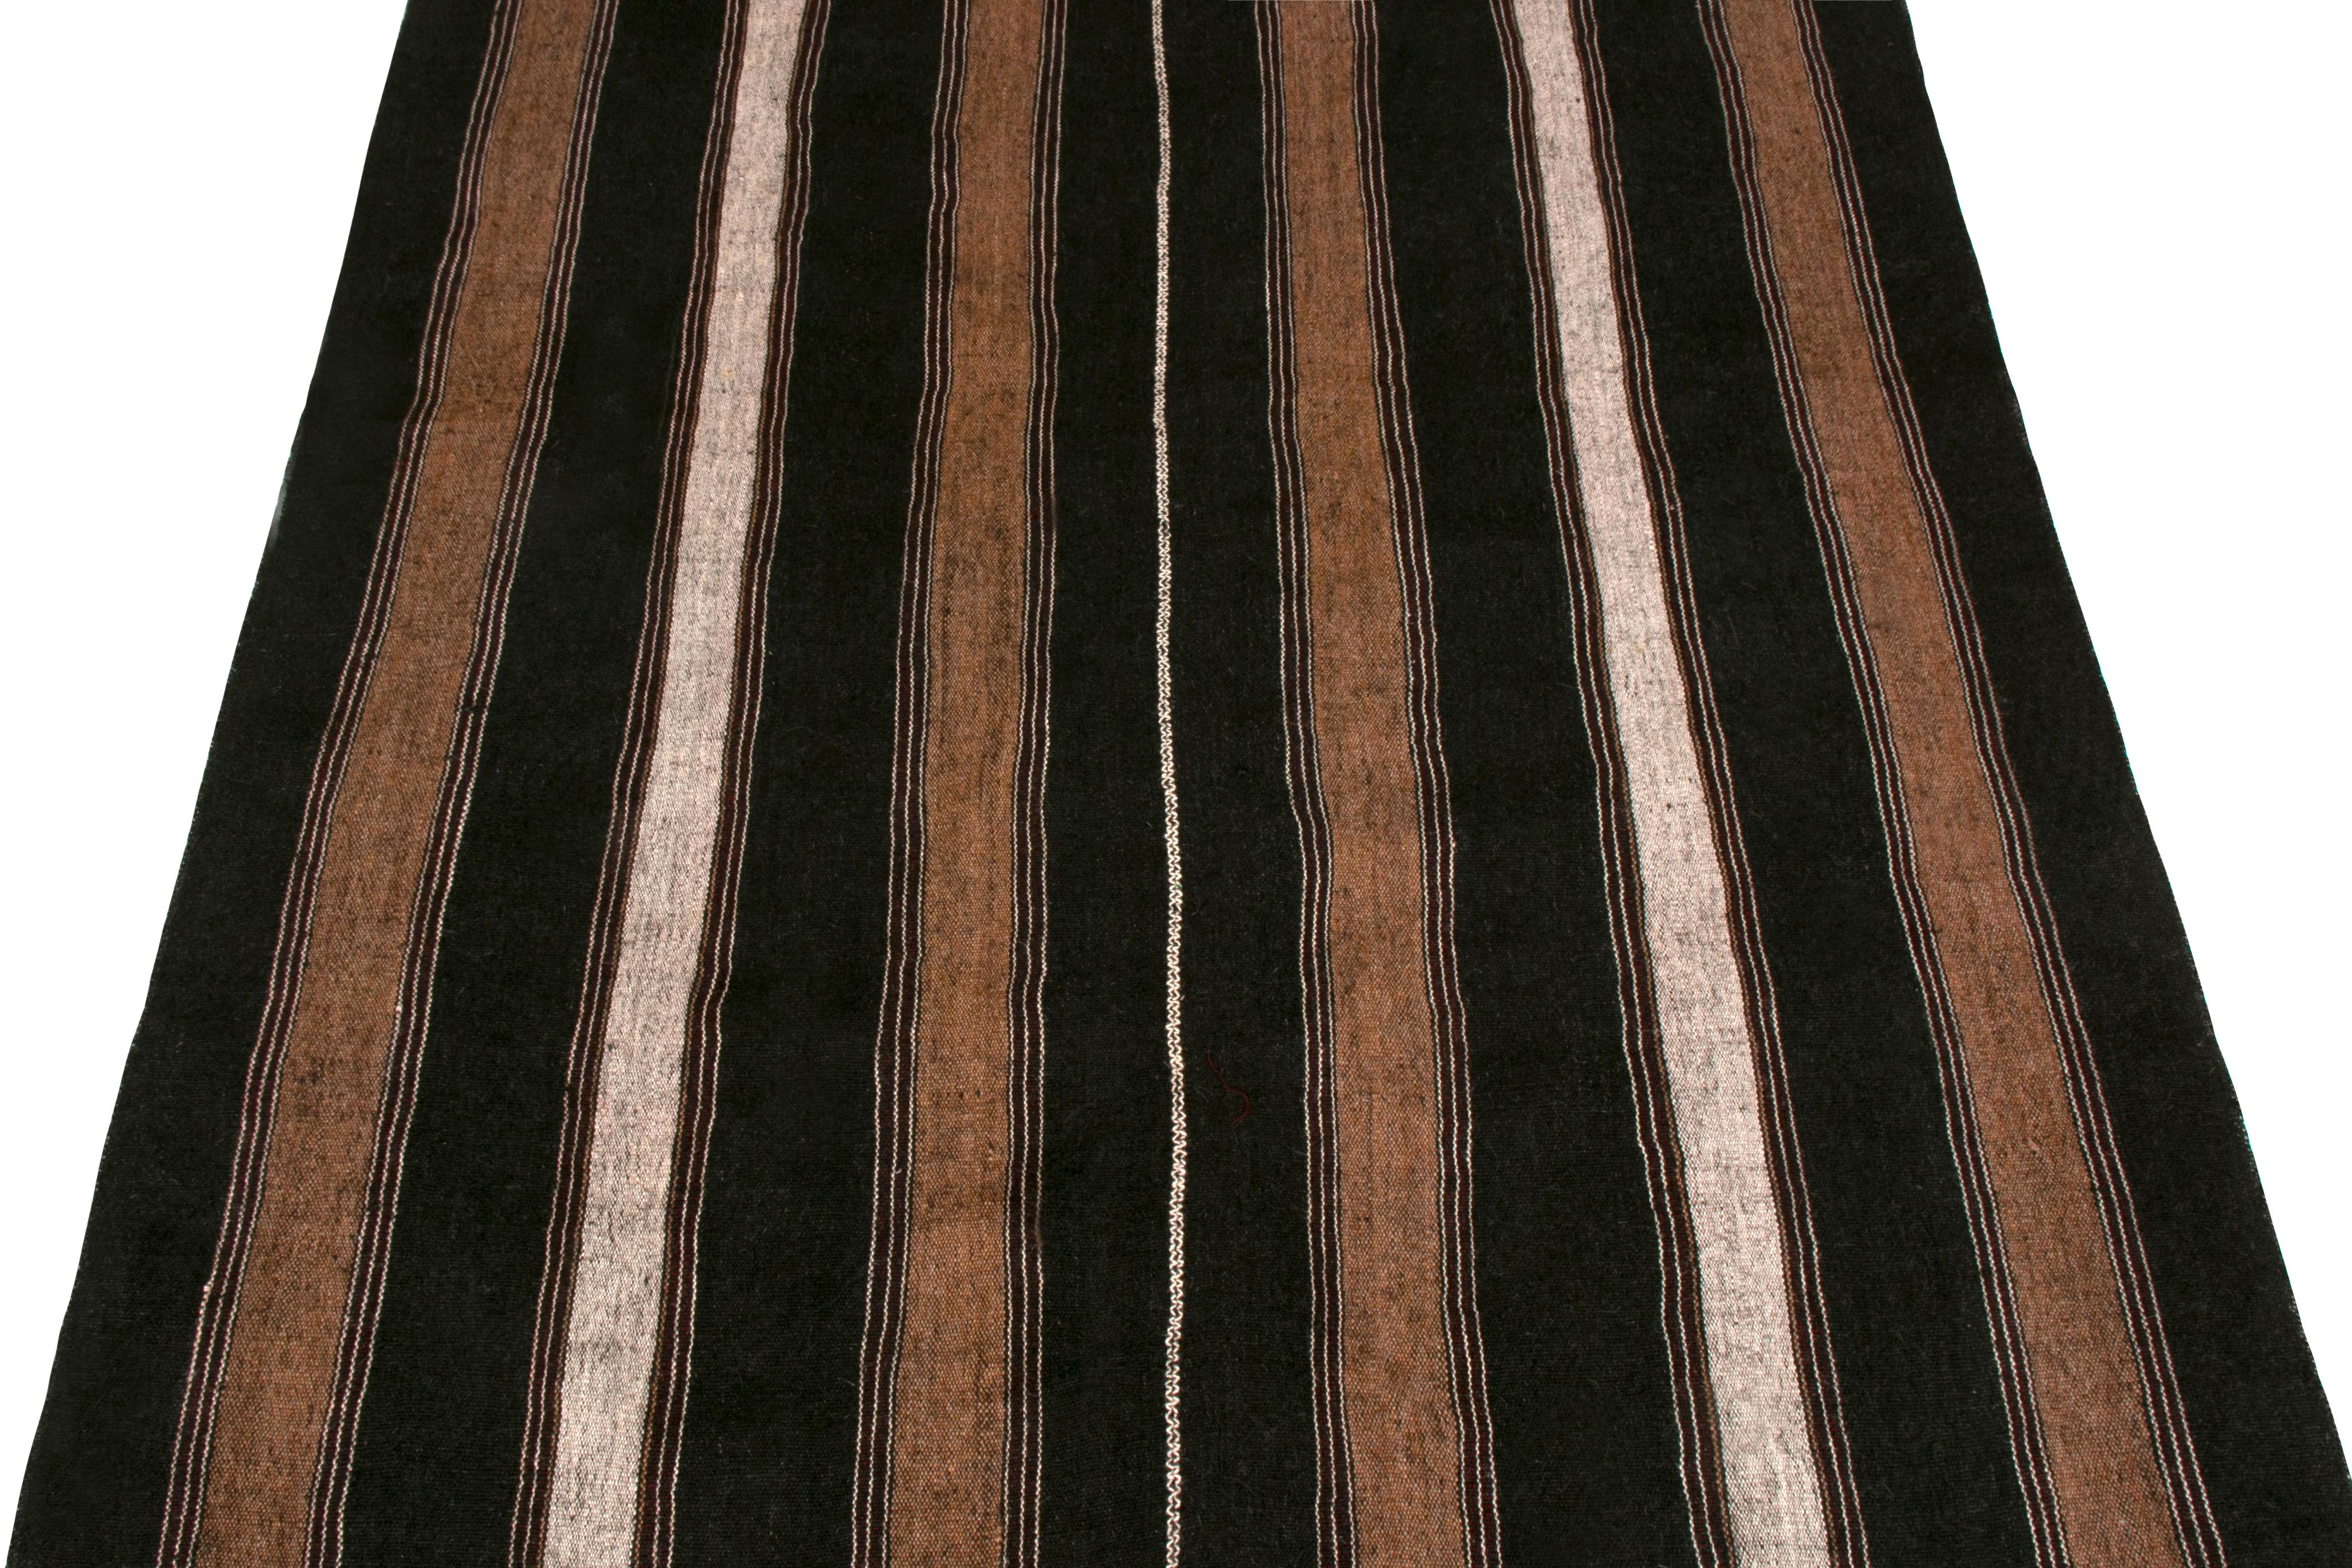 Hand-Woven 1950s Midcentury Persian Kilim Black and Beige-Brown Striped Vintage Flat-Weave